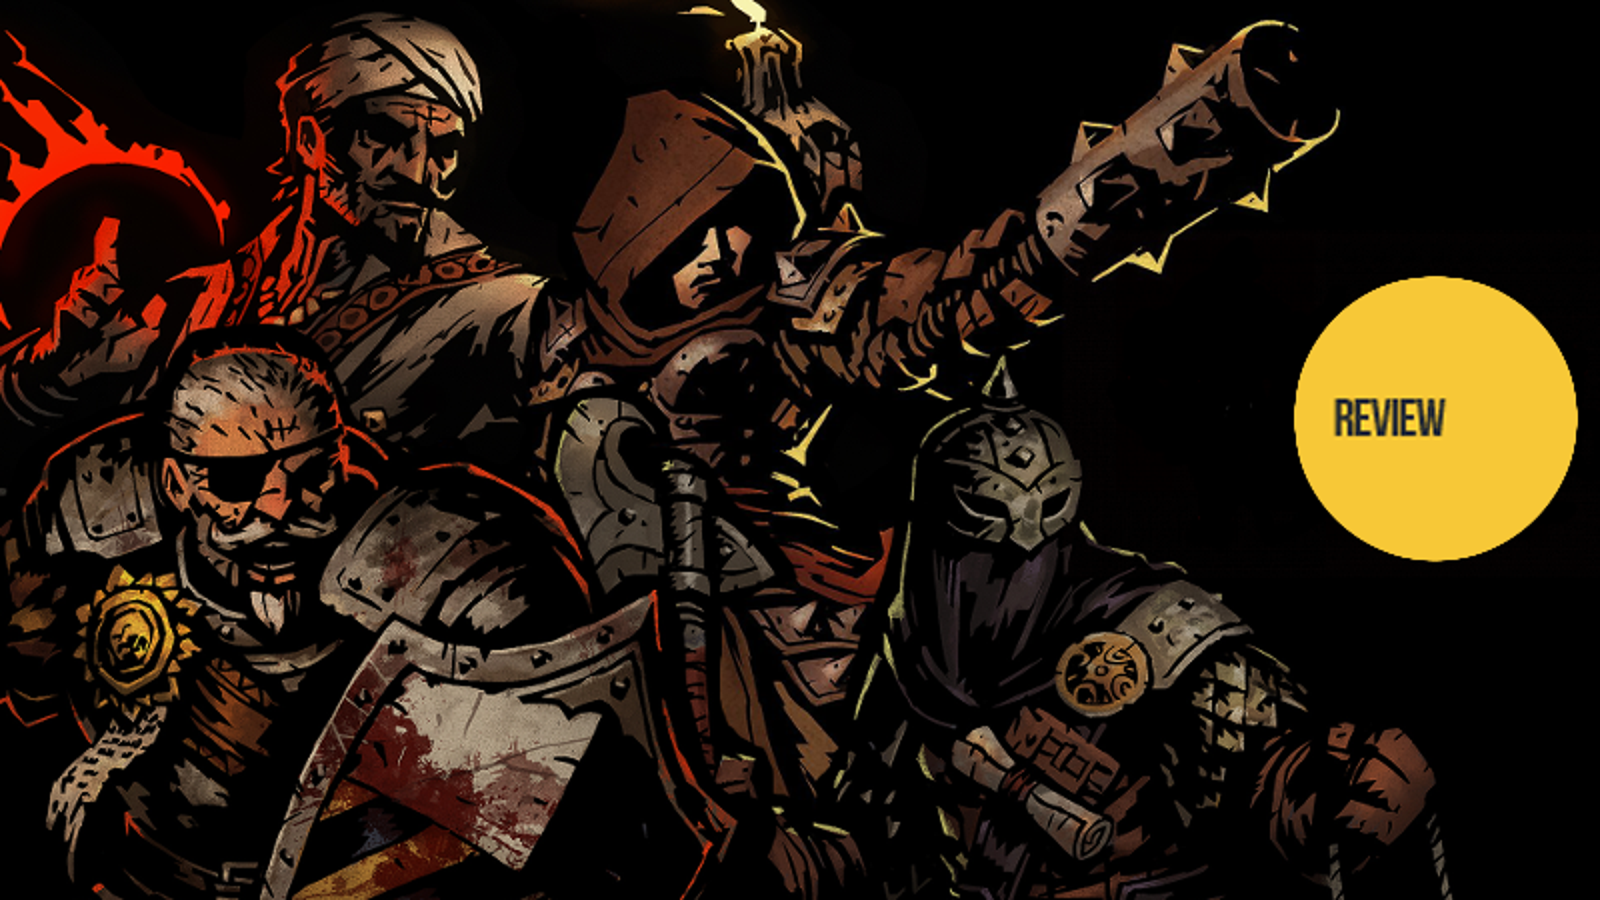 darkest dungeon mod that has inventory expansion but not trinket expansion